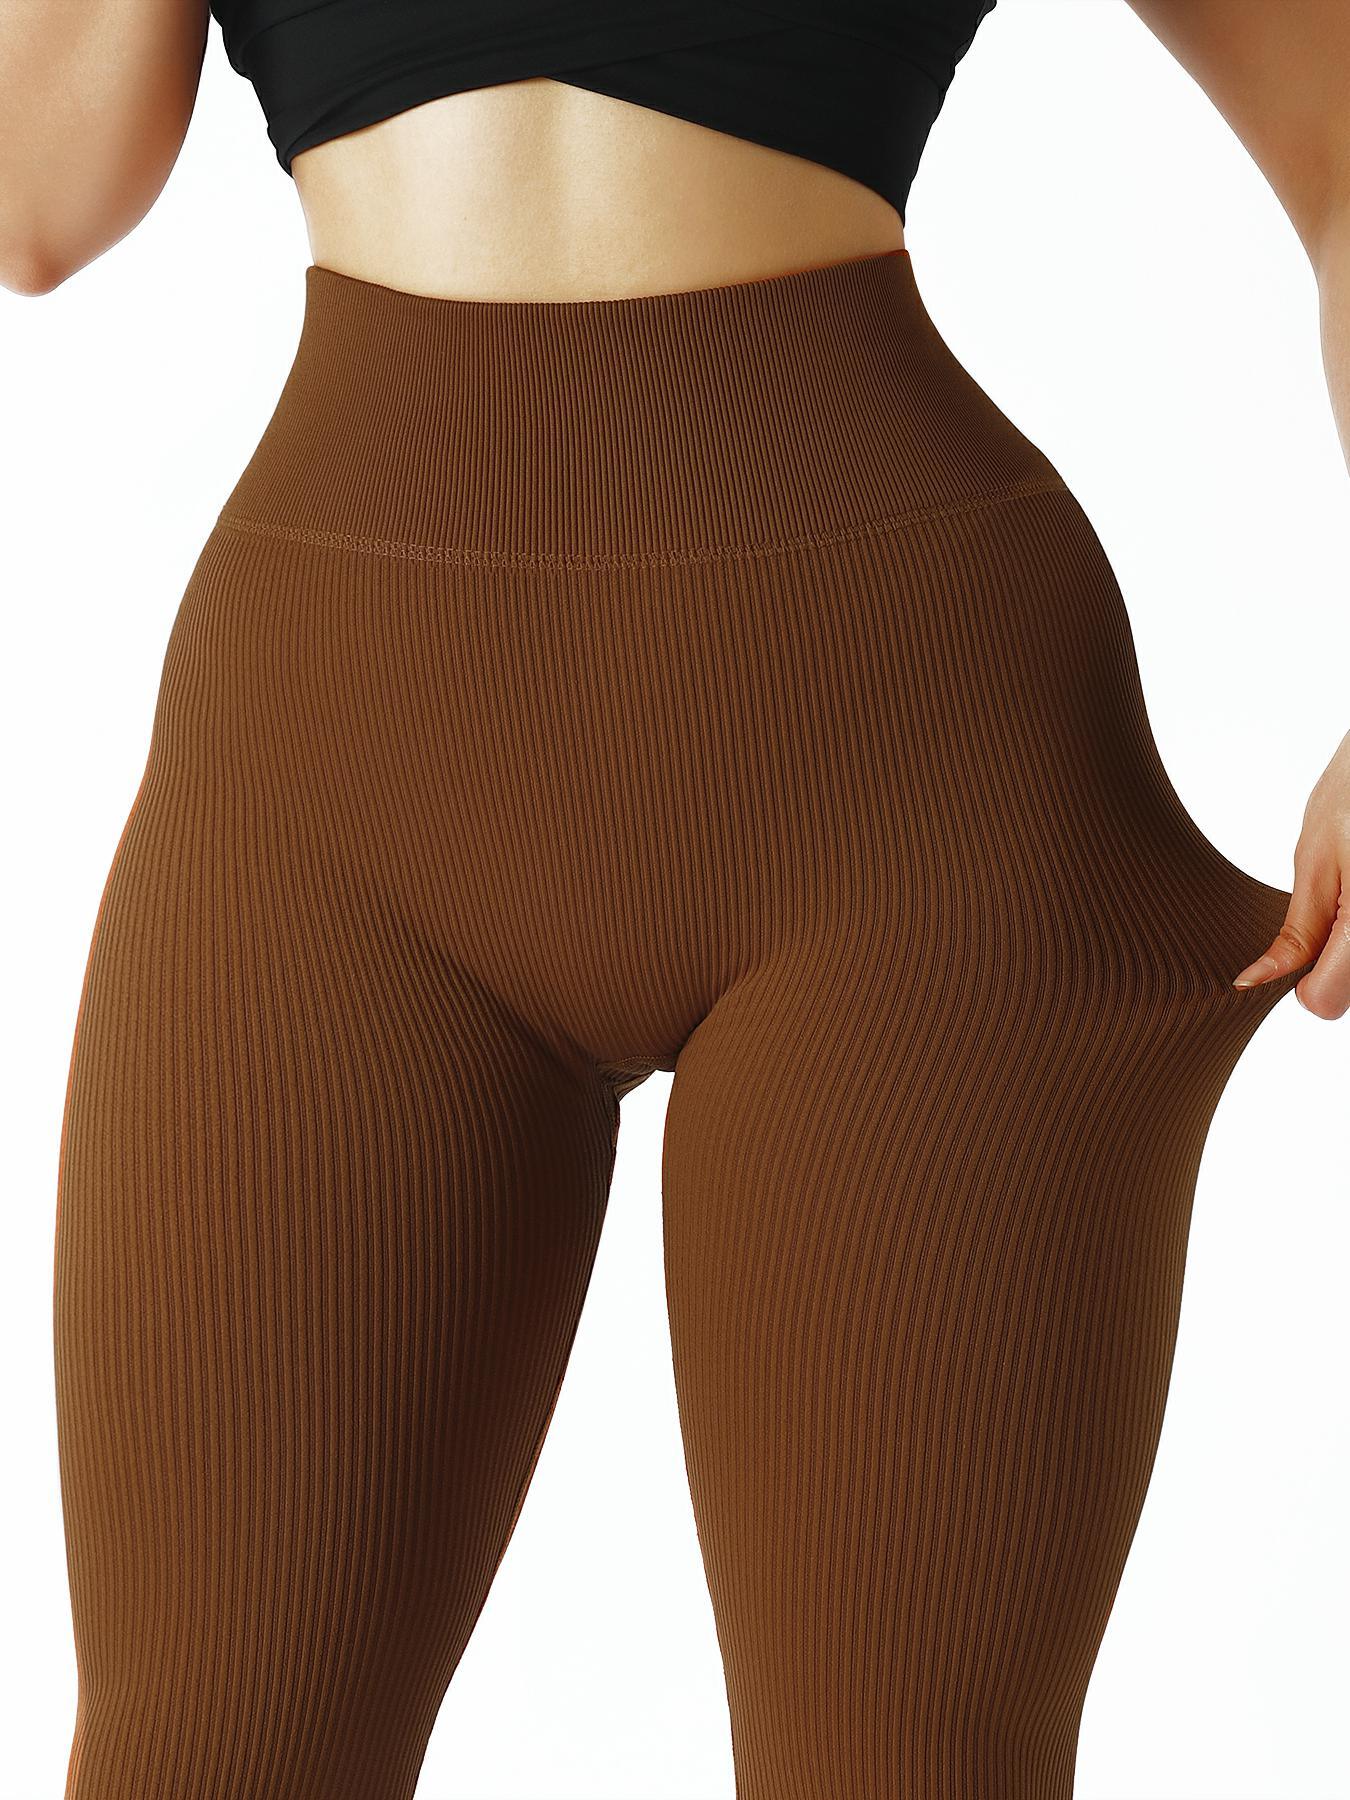 Suuksess Leggings for Women - Free Shipping, Original Styles and Colors